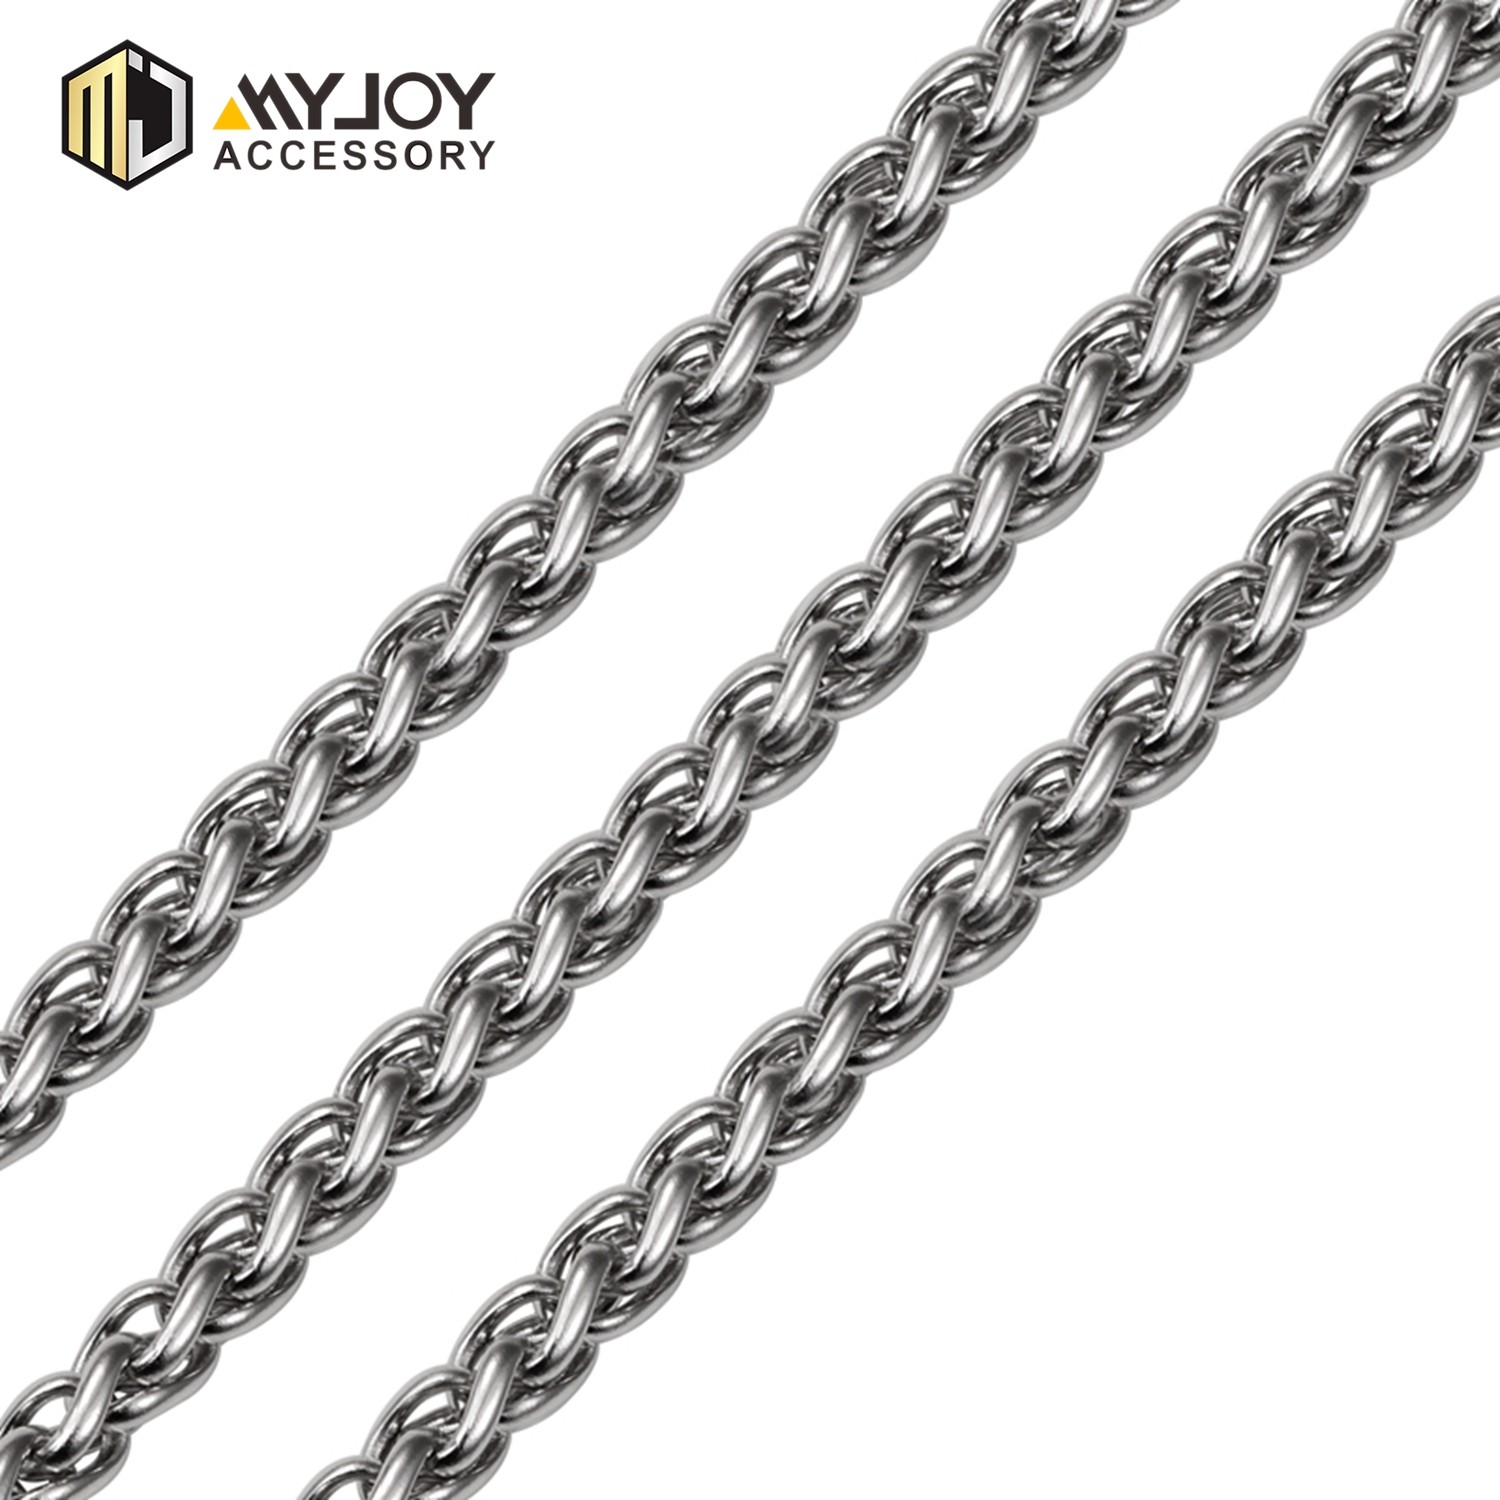 MYJOY chains chain strap Suppliers for purses-3